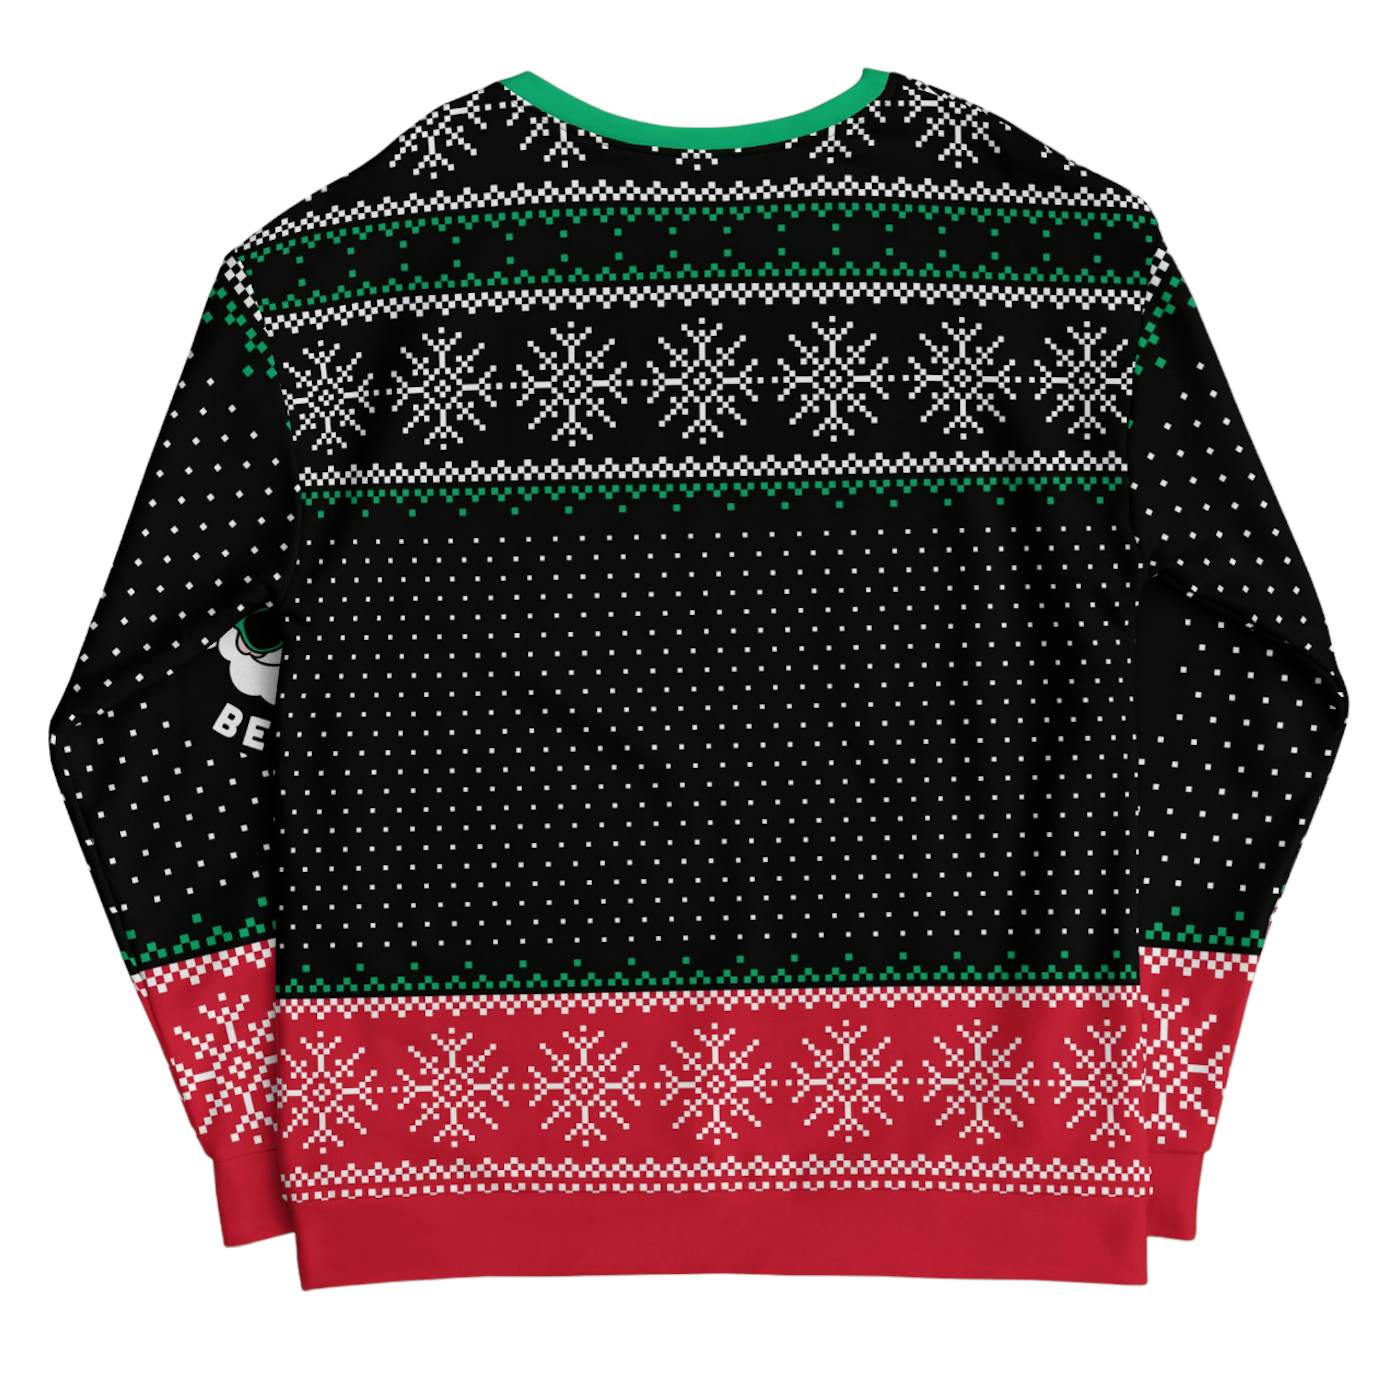 Journey Holiday Sweater